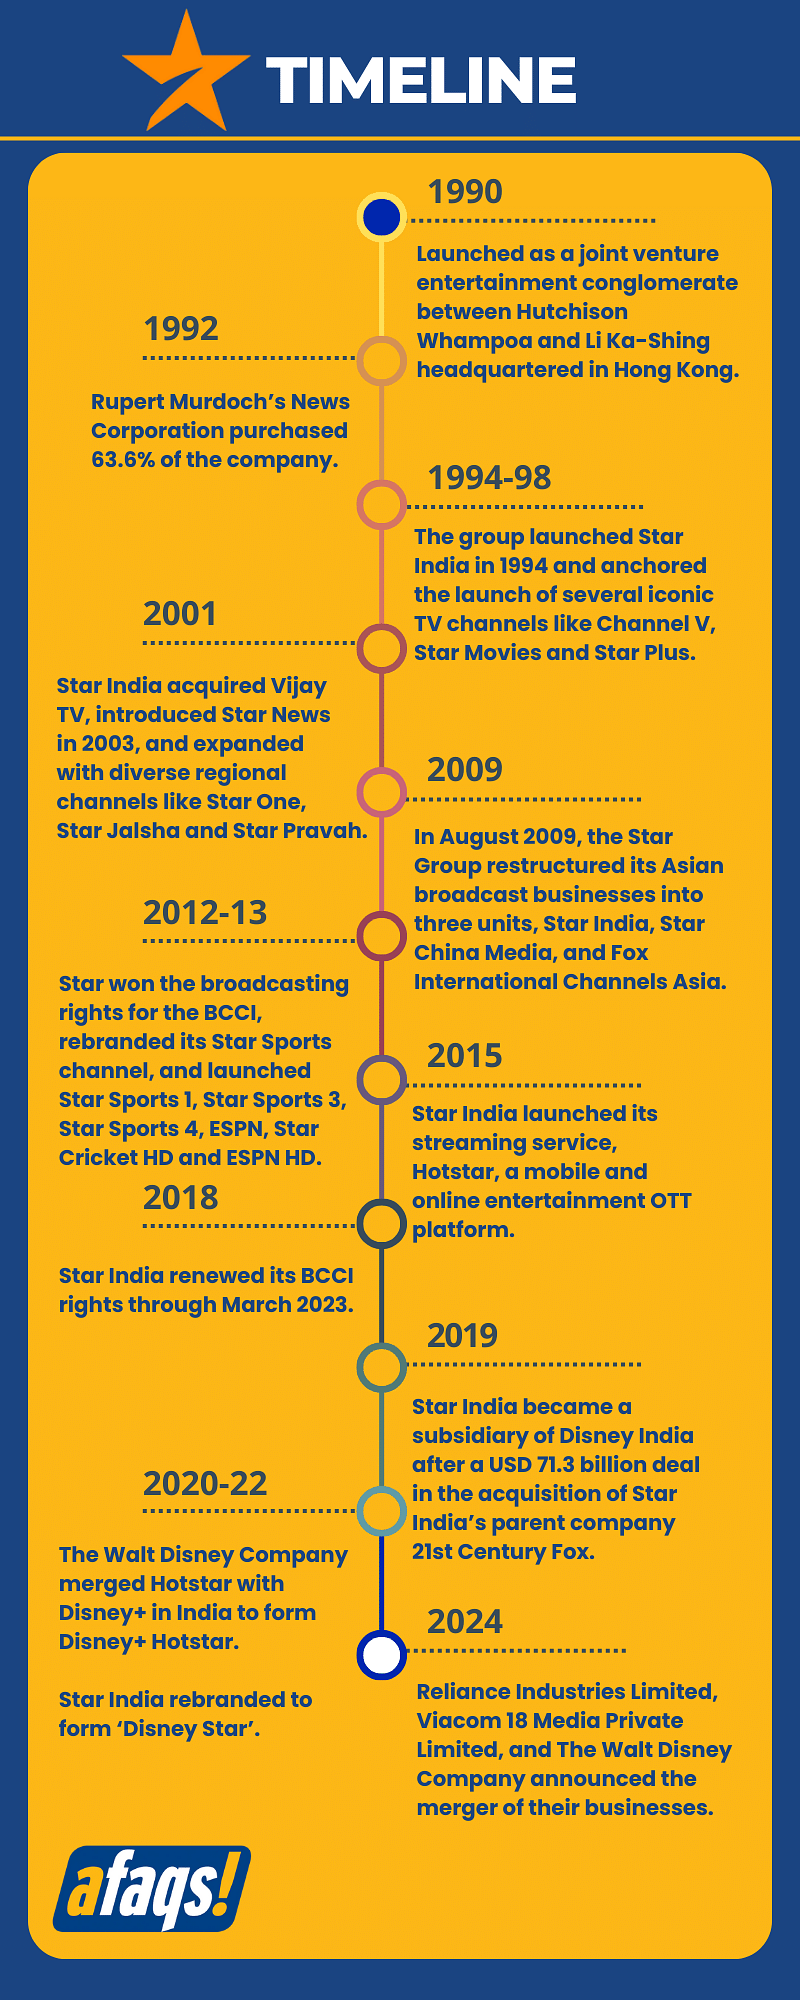 Corporate timeline of Star India